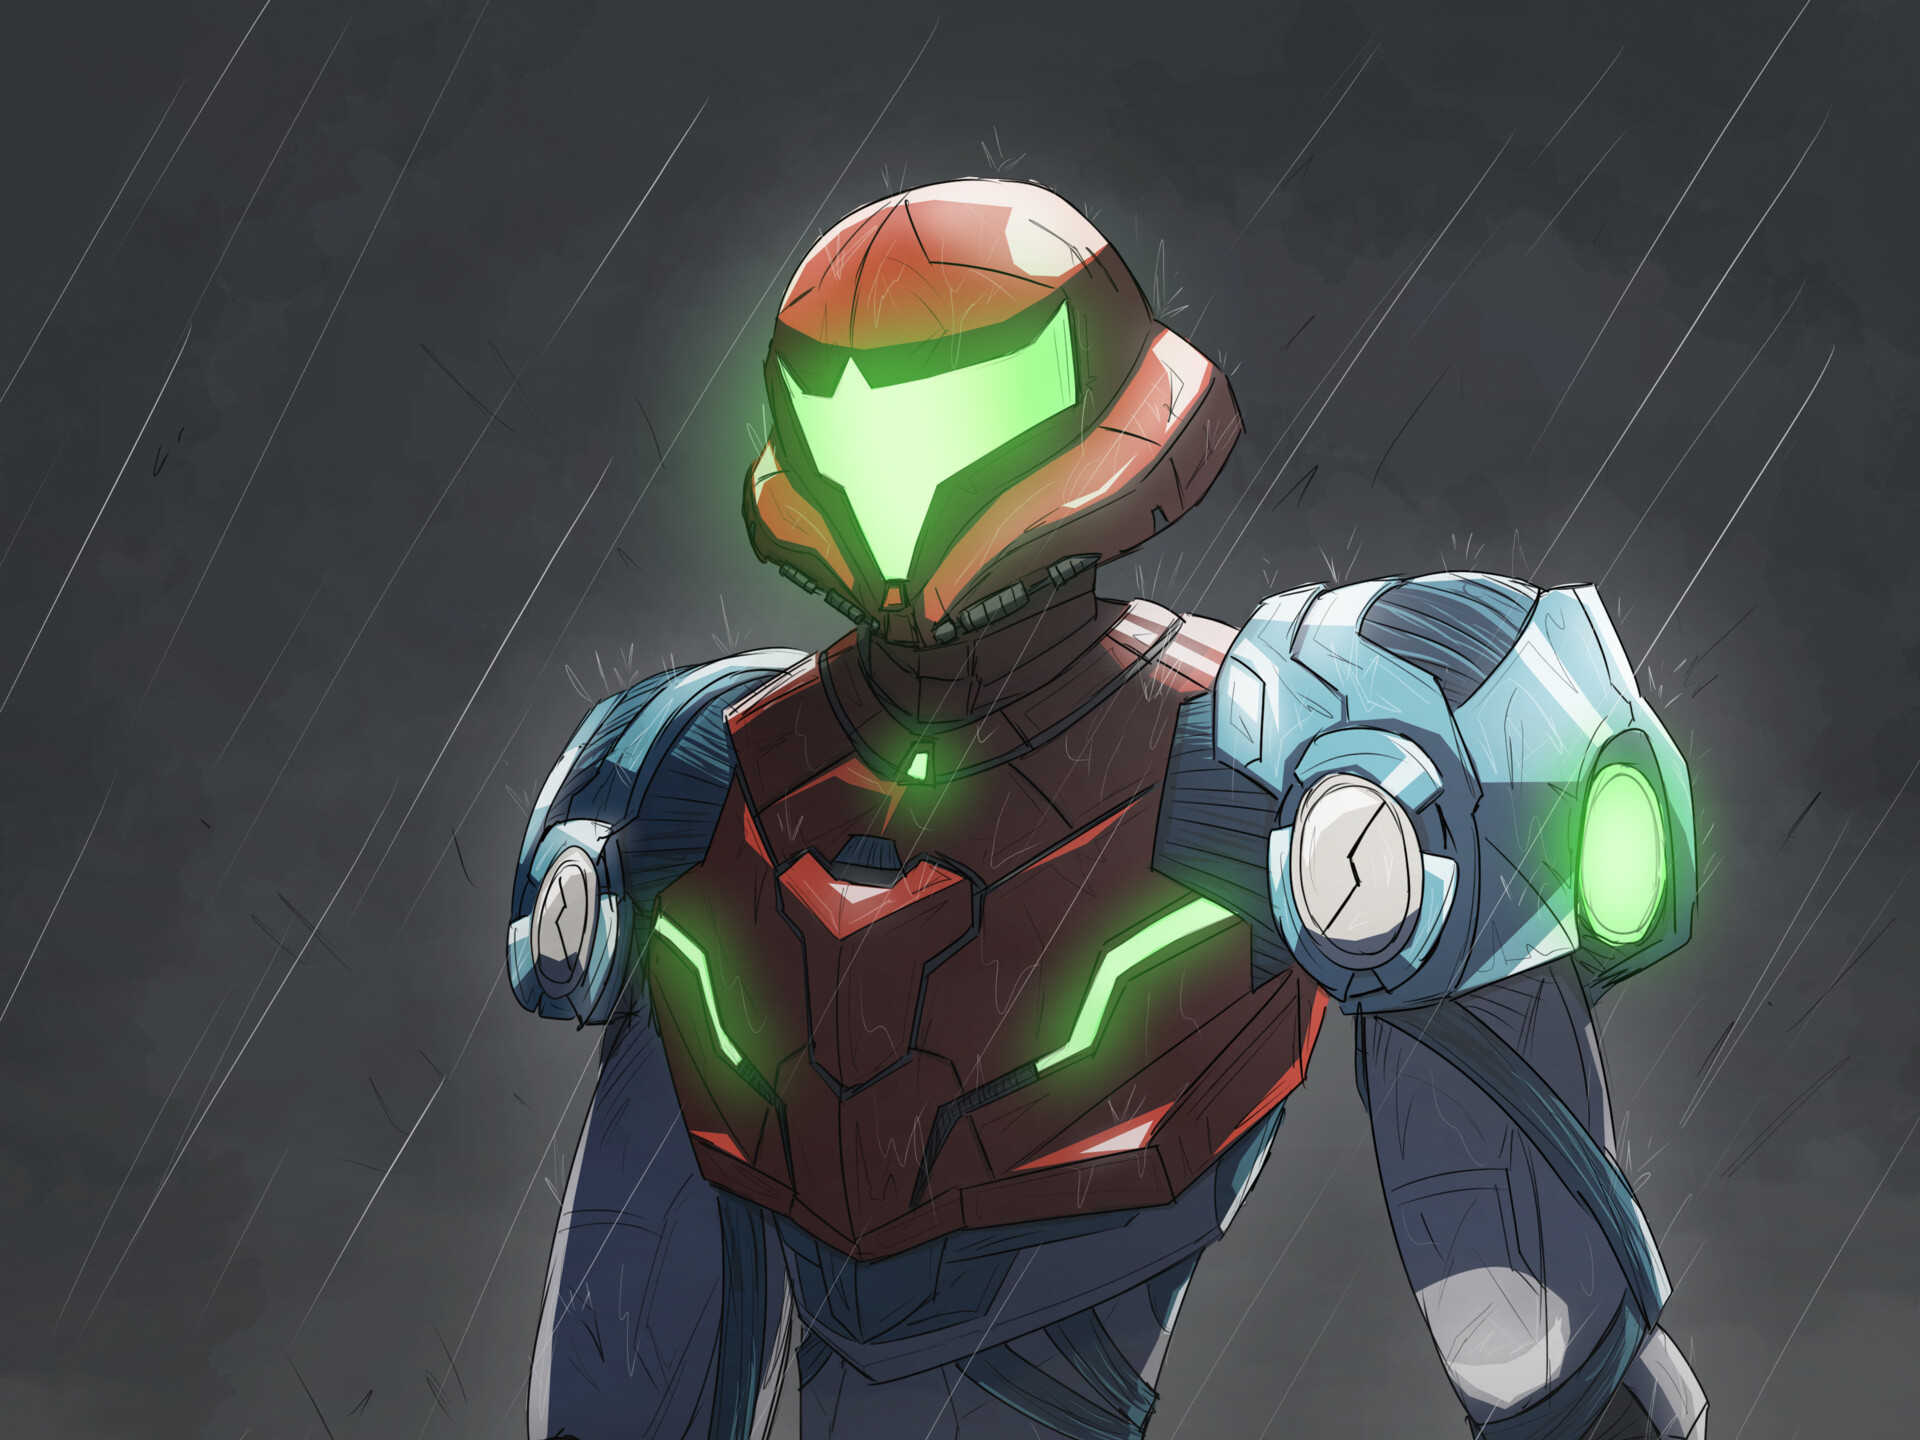 Video Game Metroid Dread HD Wallpaper | Background Image